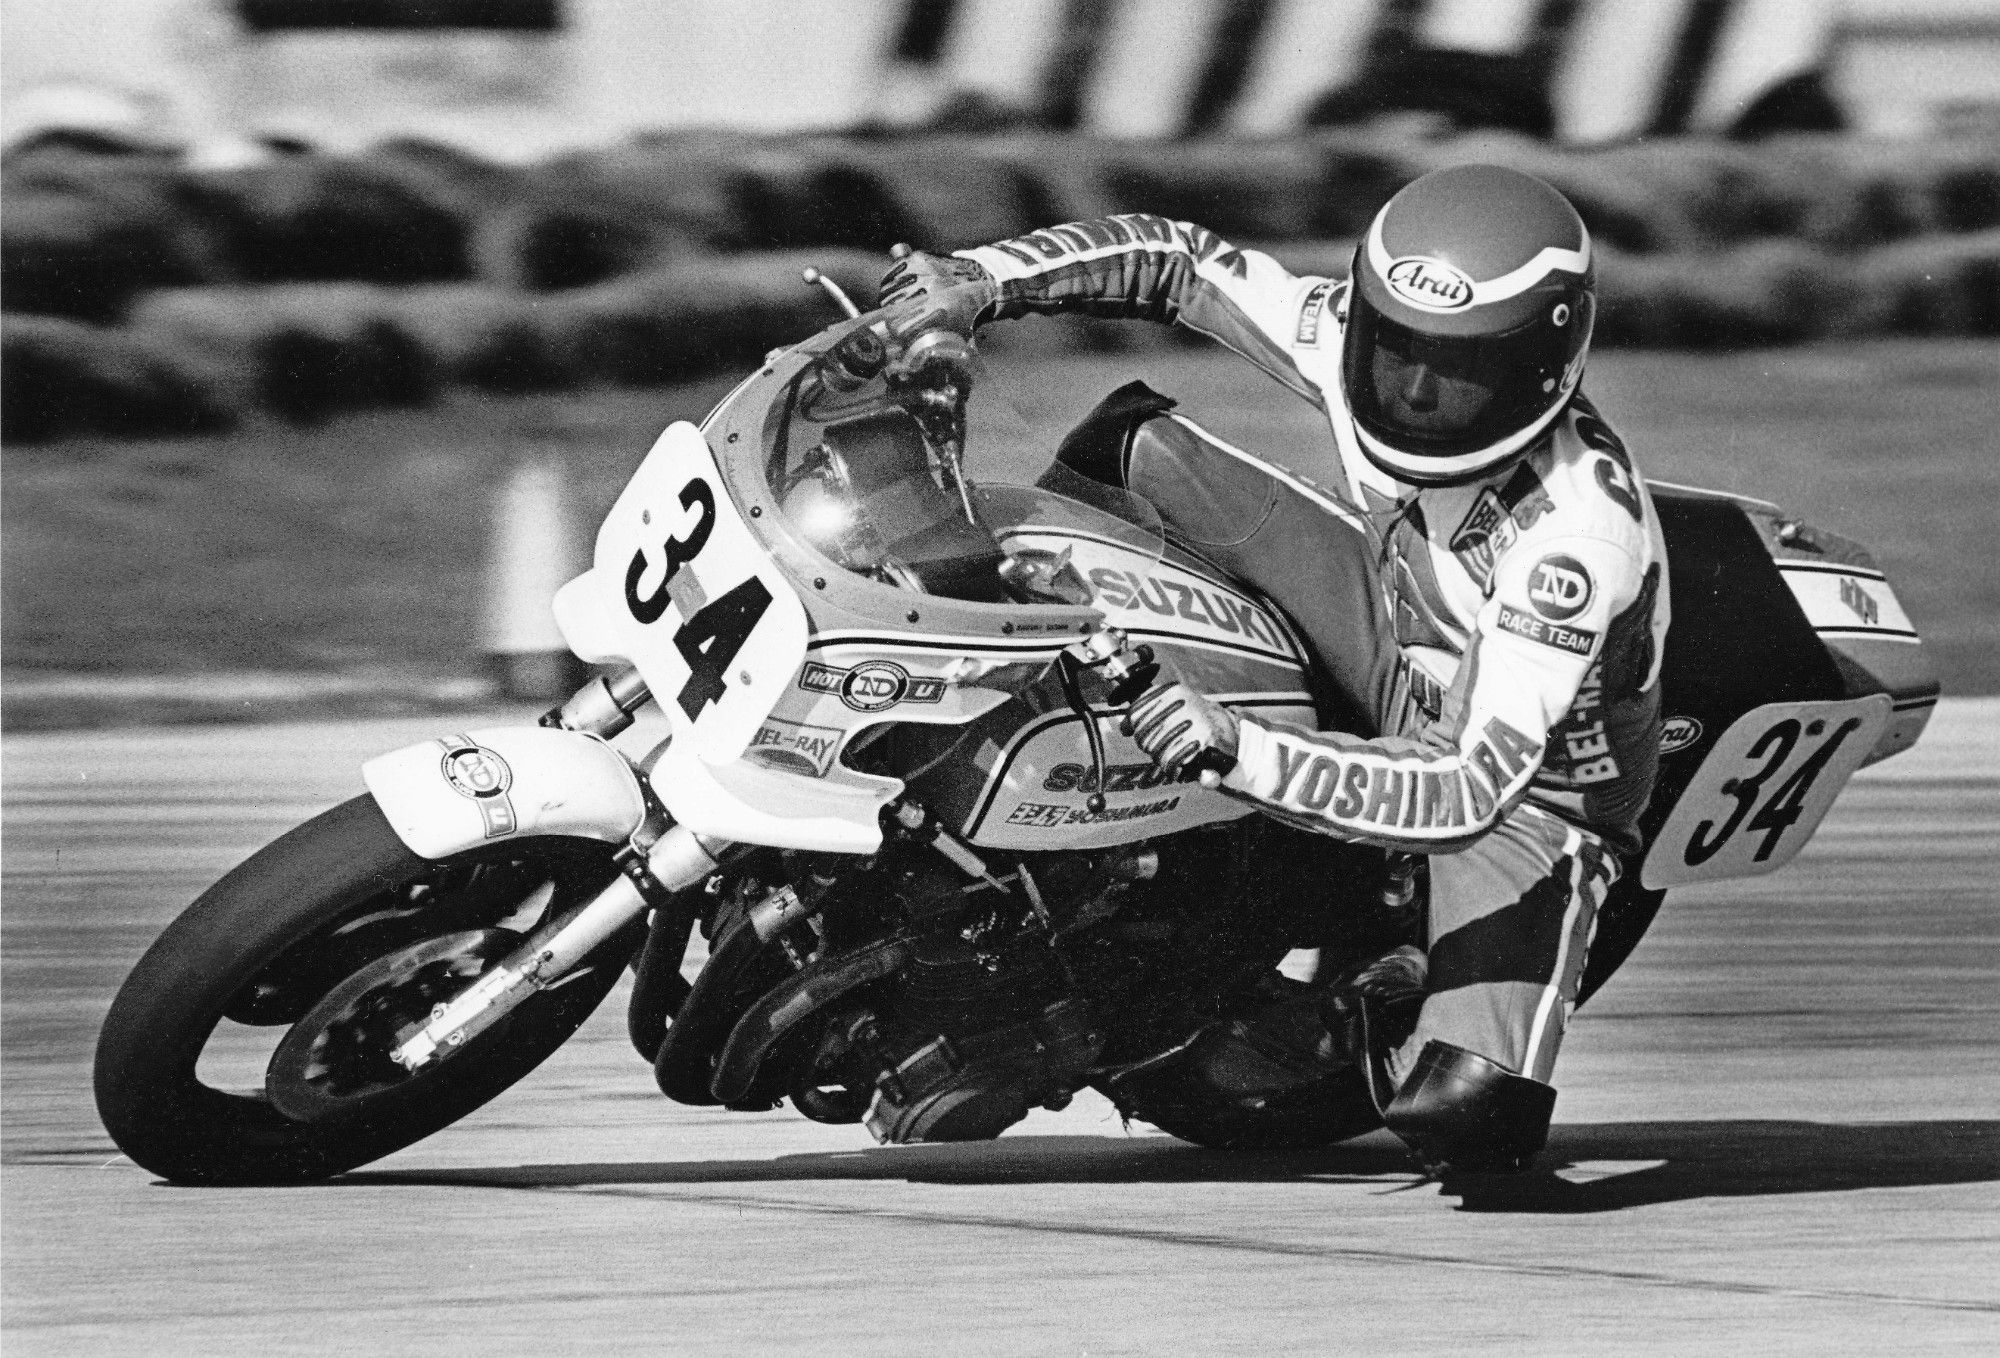 1979 and 1980 AMA Superbike winning racer Wes Cooley on a Suzuki GS1000